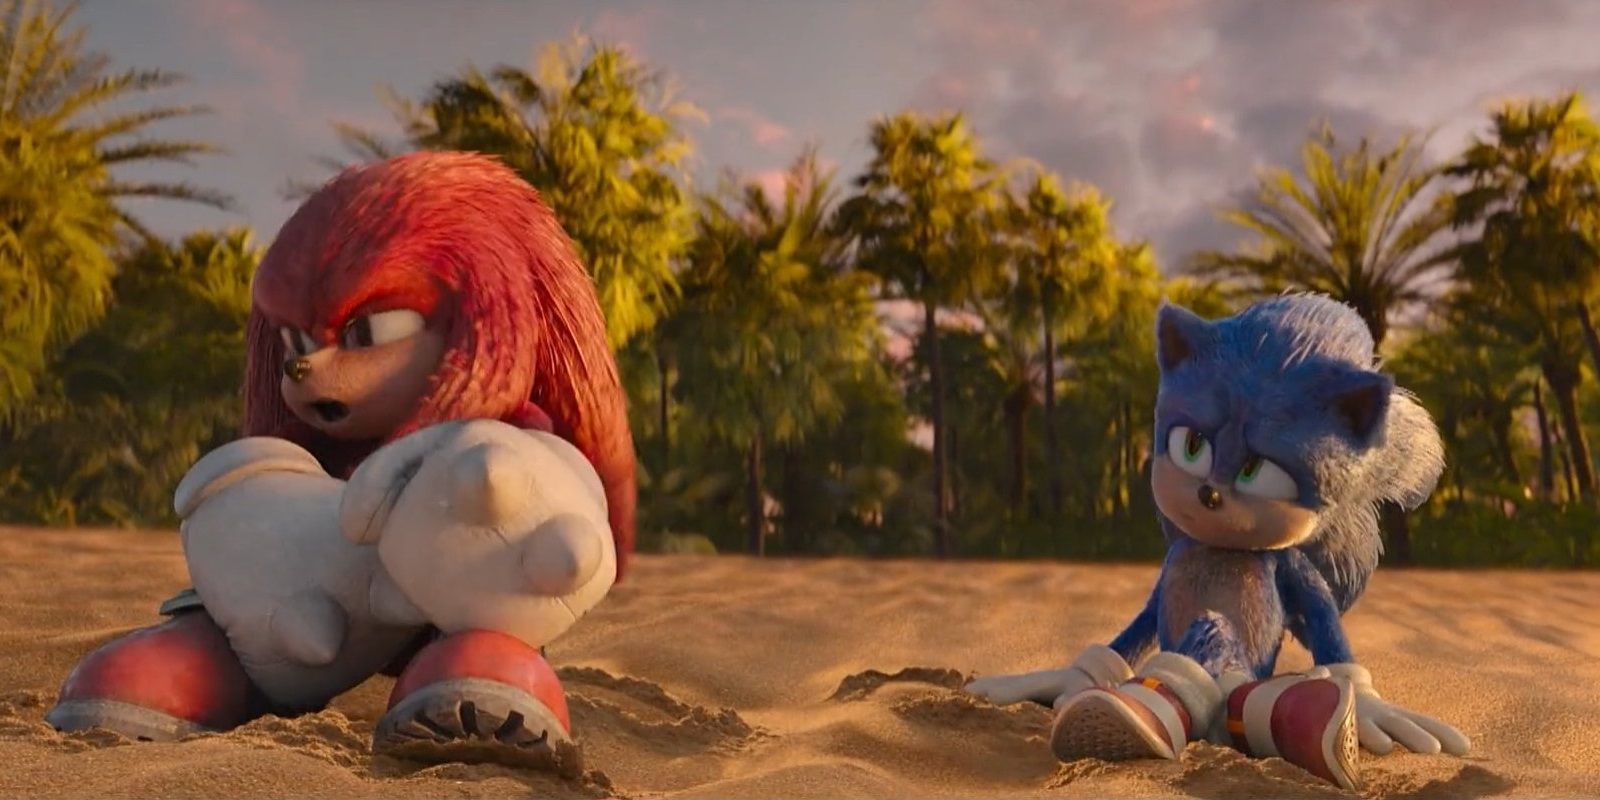 Sonic and Knuckles on the beach in Sonic the Hedgehog 2